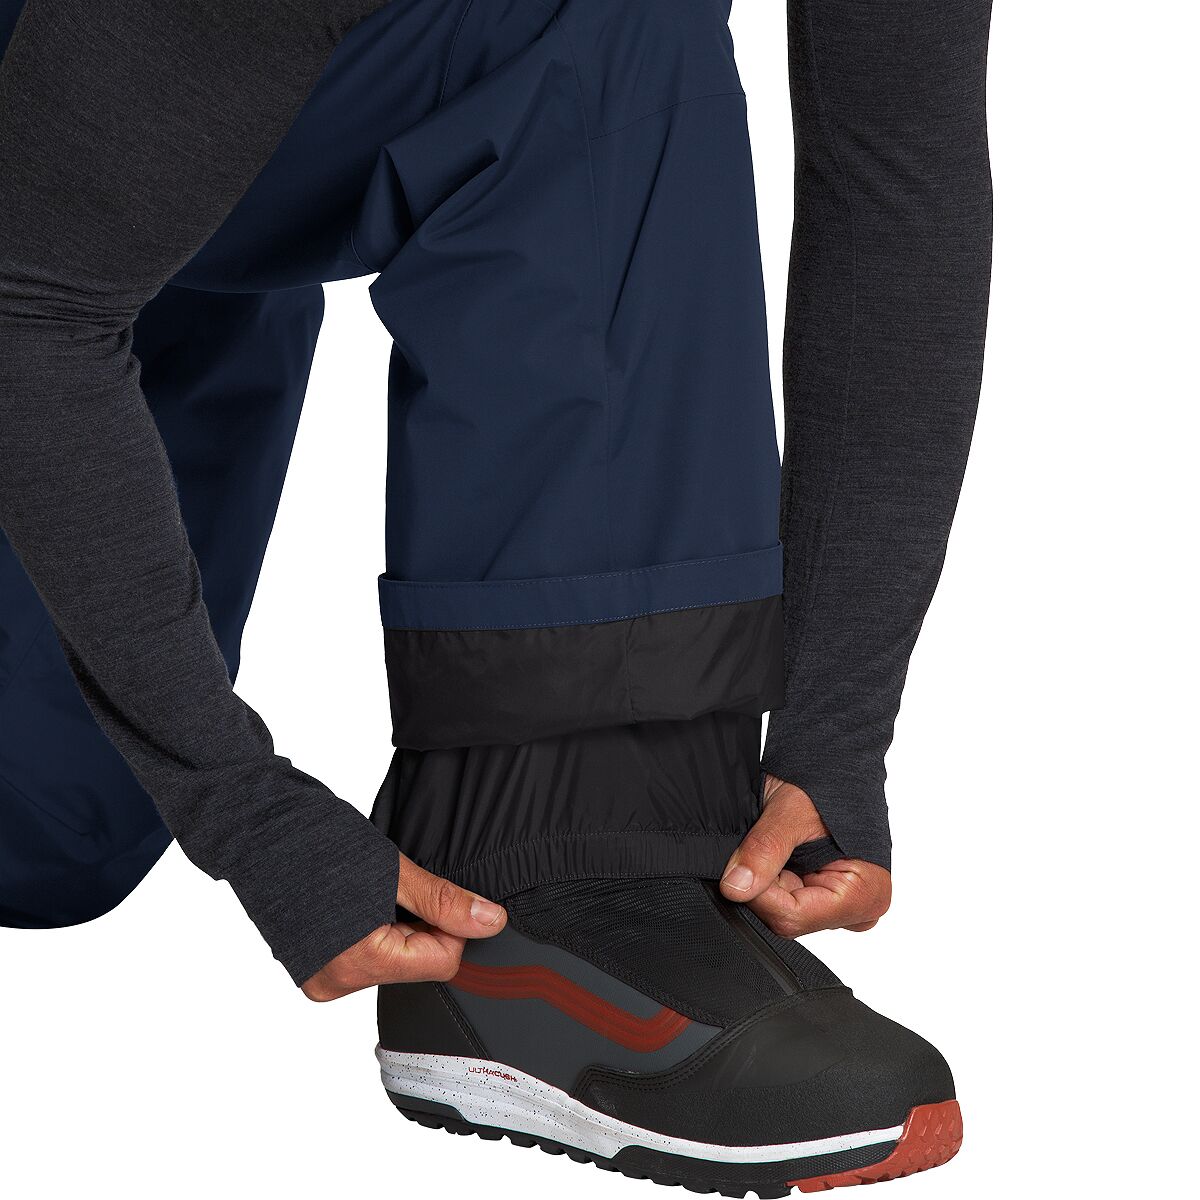 The North Face Seymore Pant - Men's - Clothing